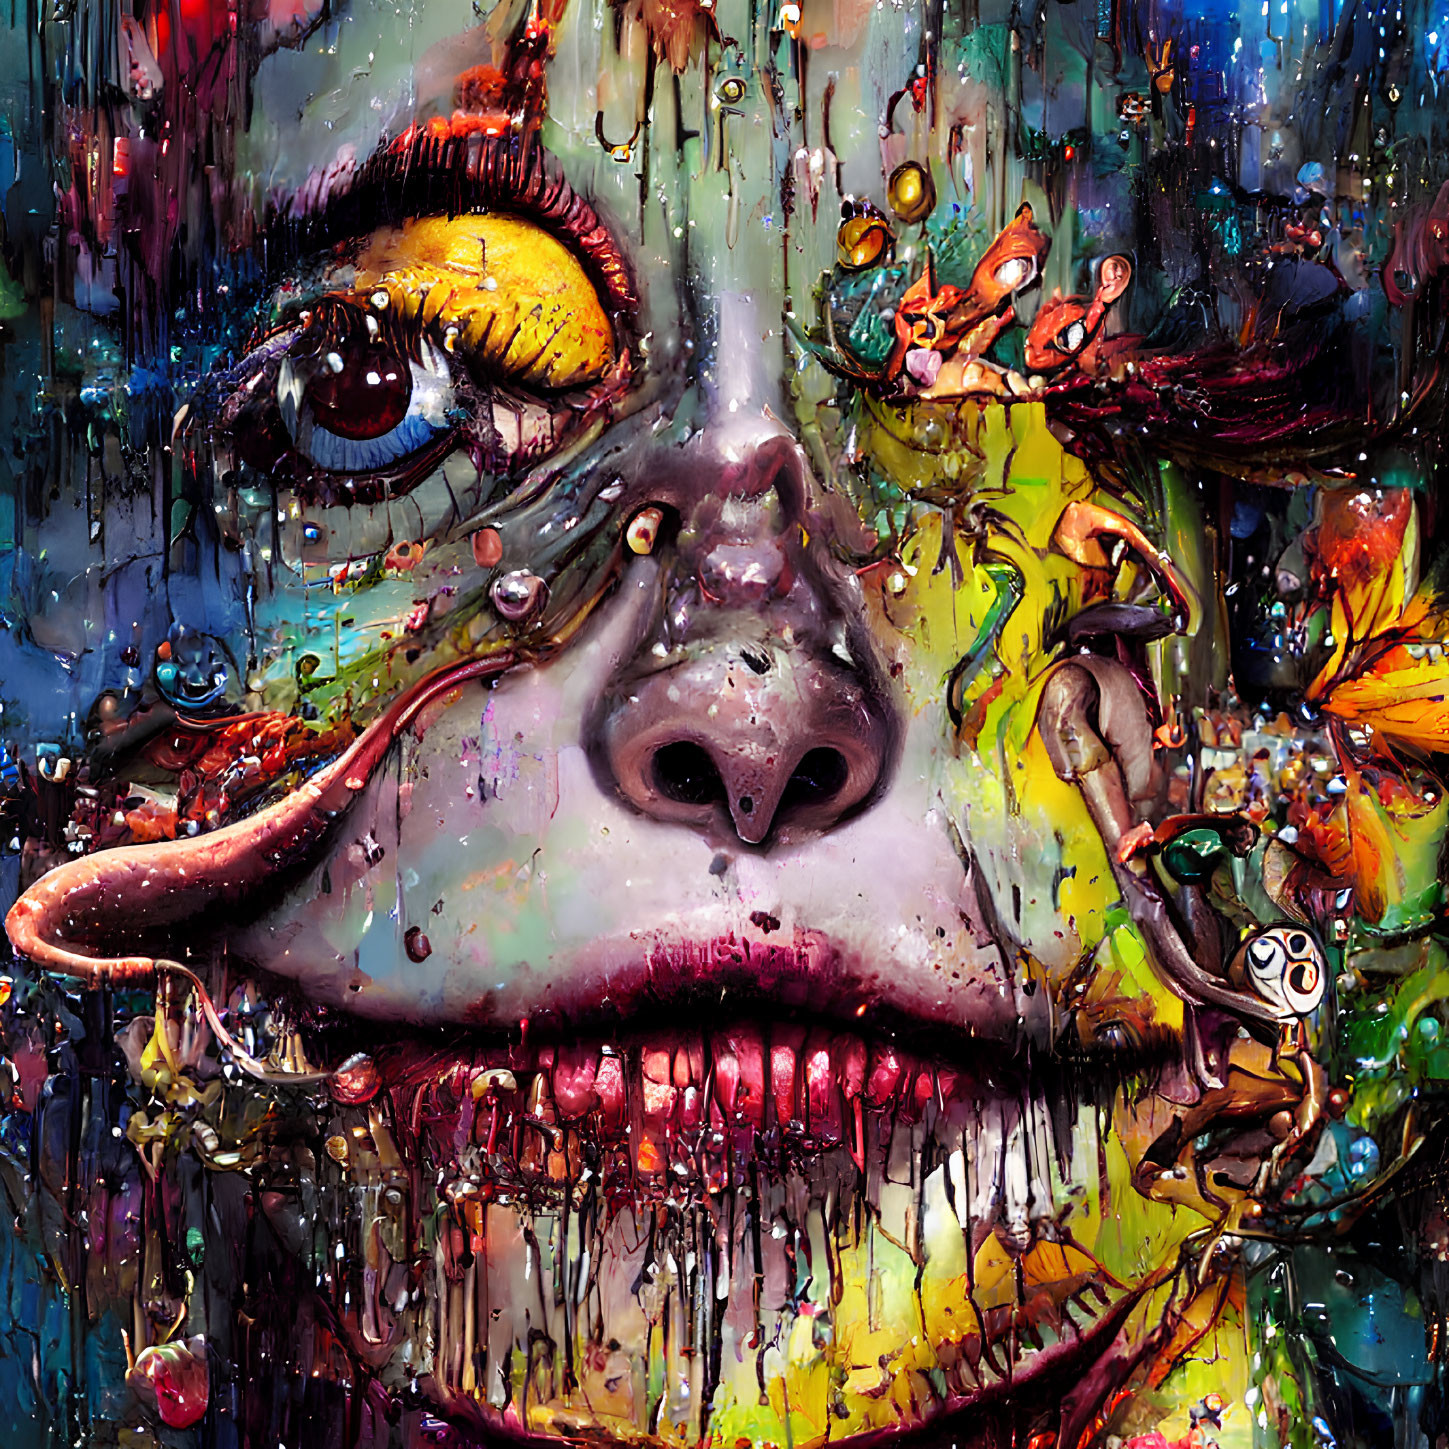 Colorful abstract painting of a face with expressive eyes and textured details